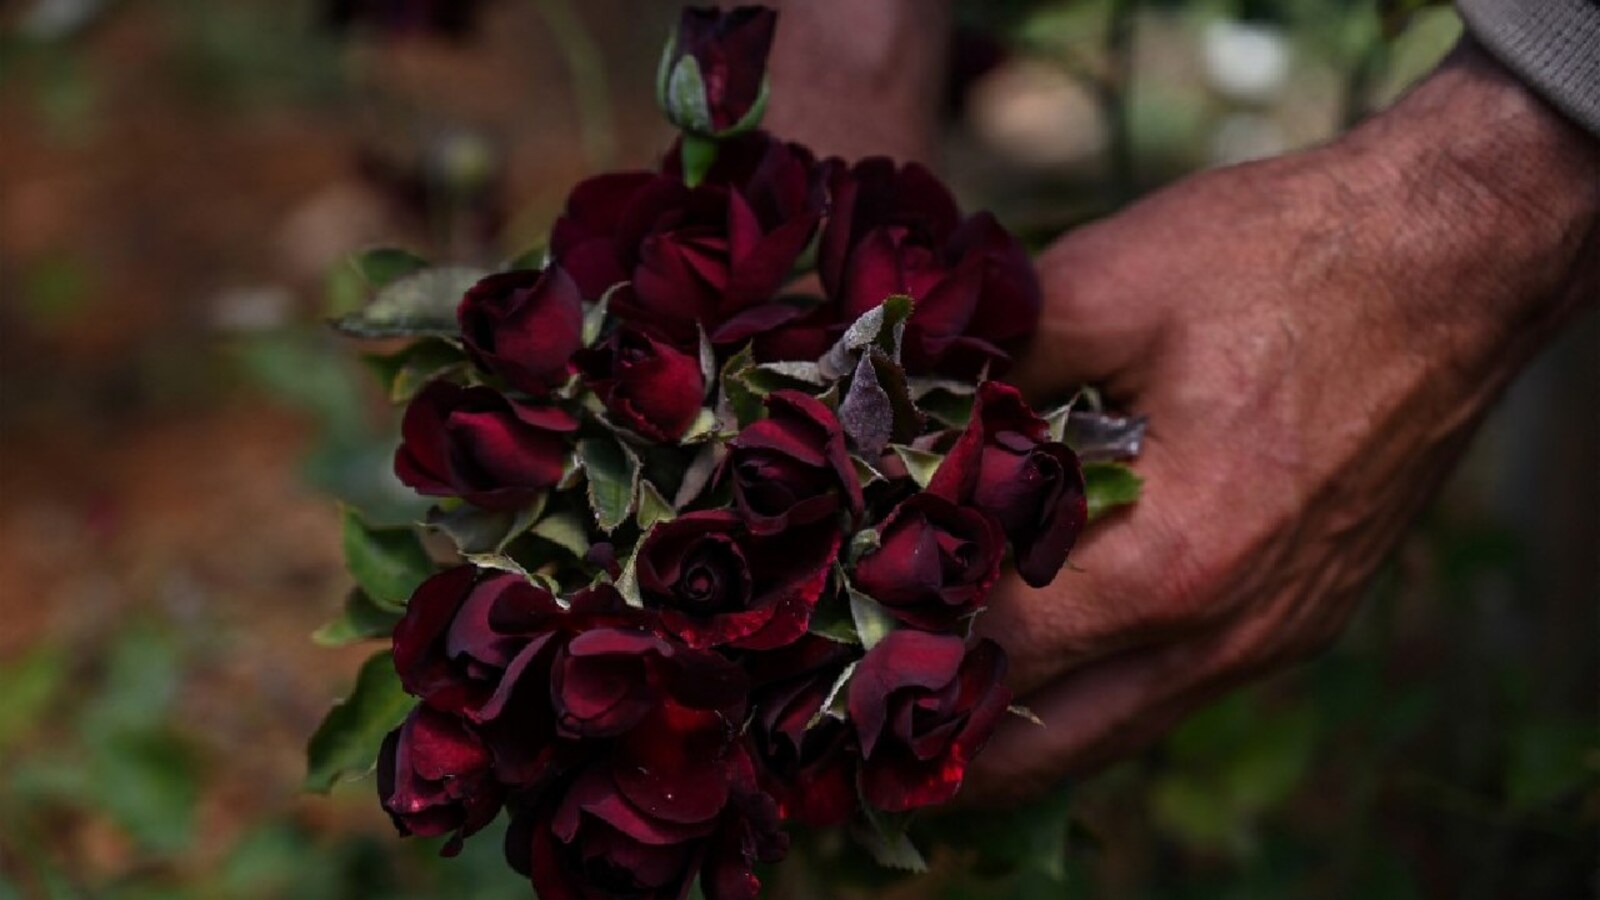 Turkey's black rose growers chase sweet smell of success